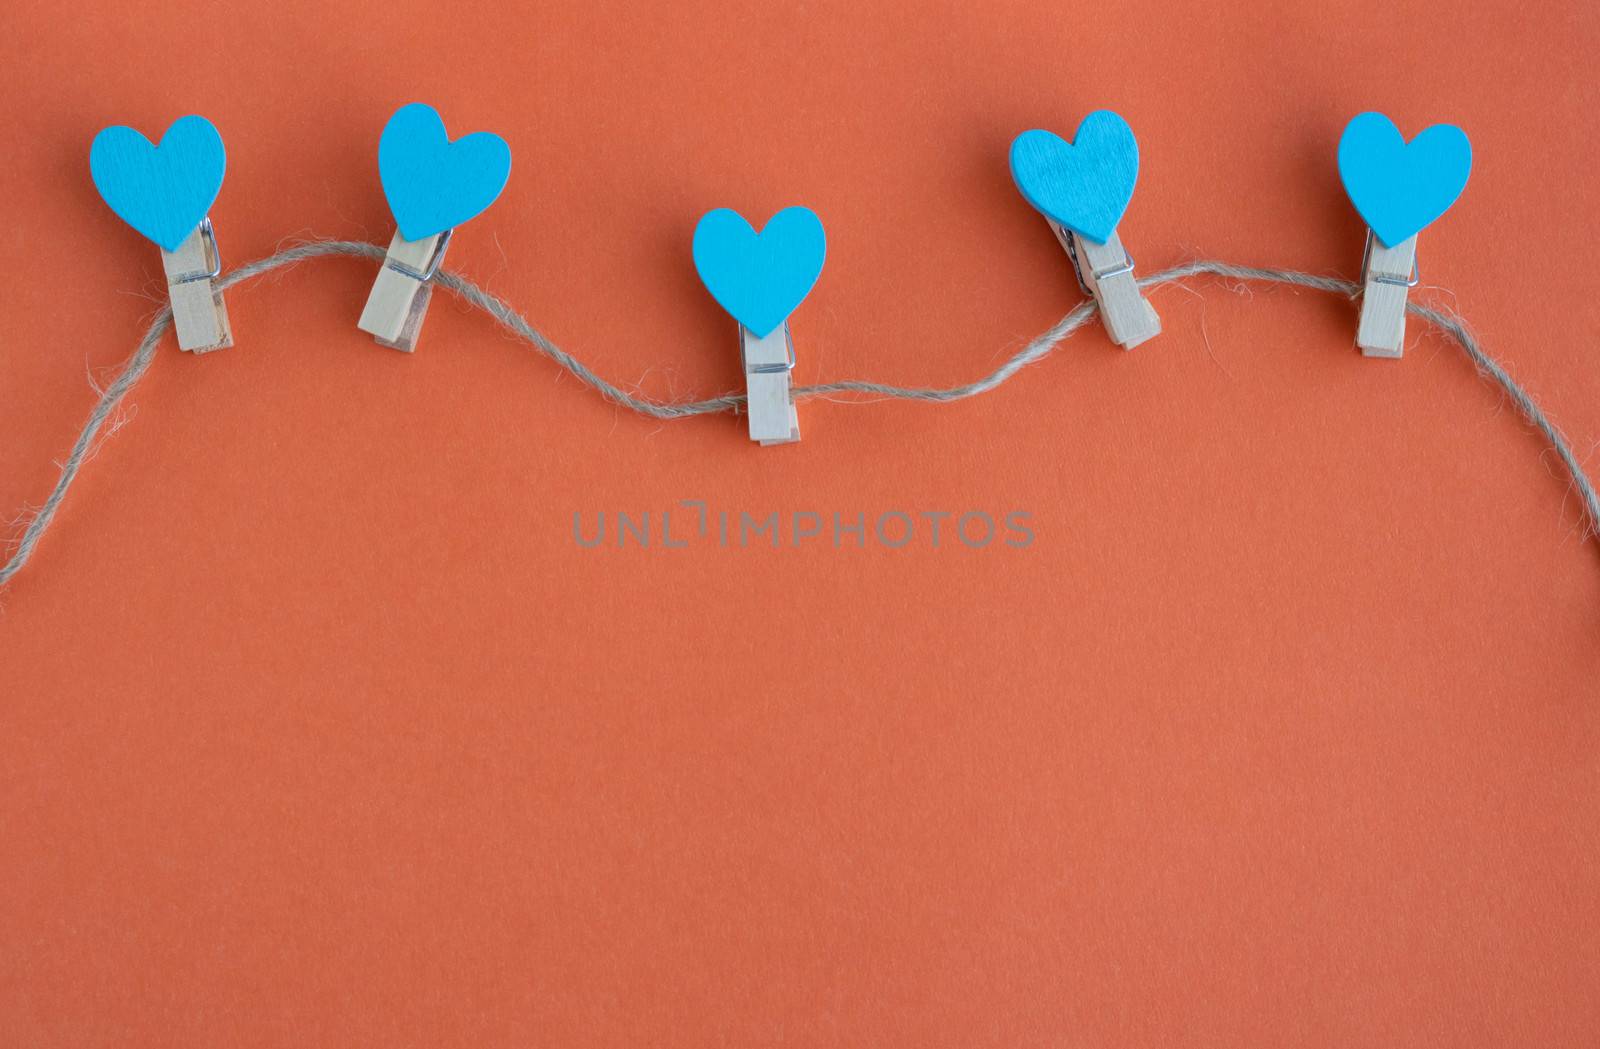 Small clothespins and blue hearts on a rope on an orange background by lapushka62